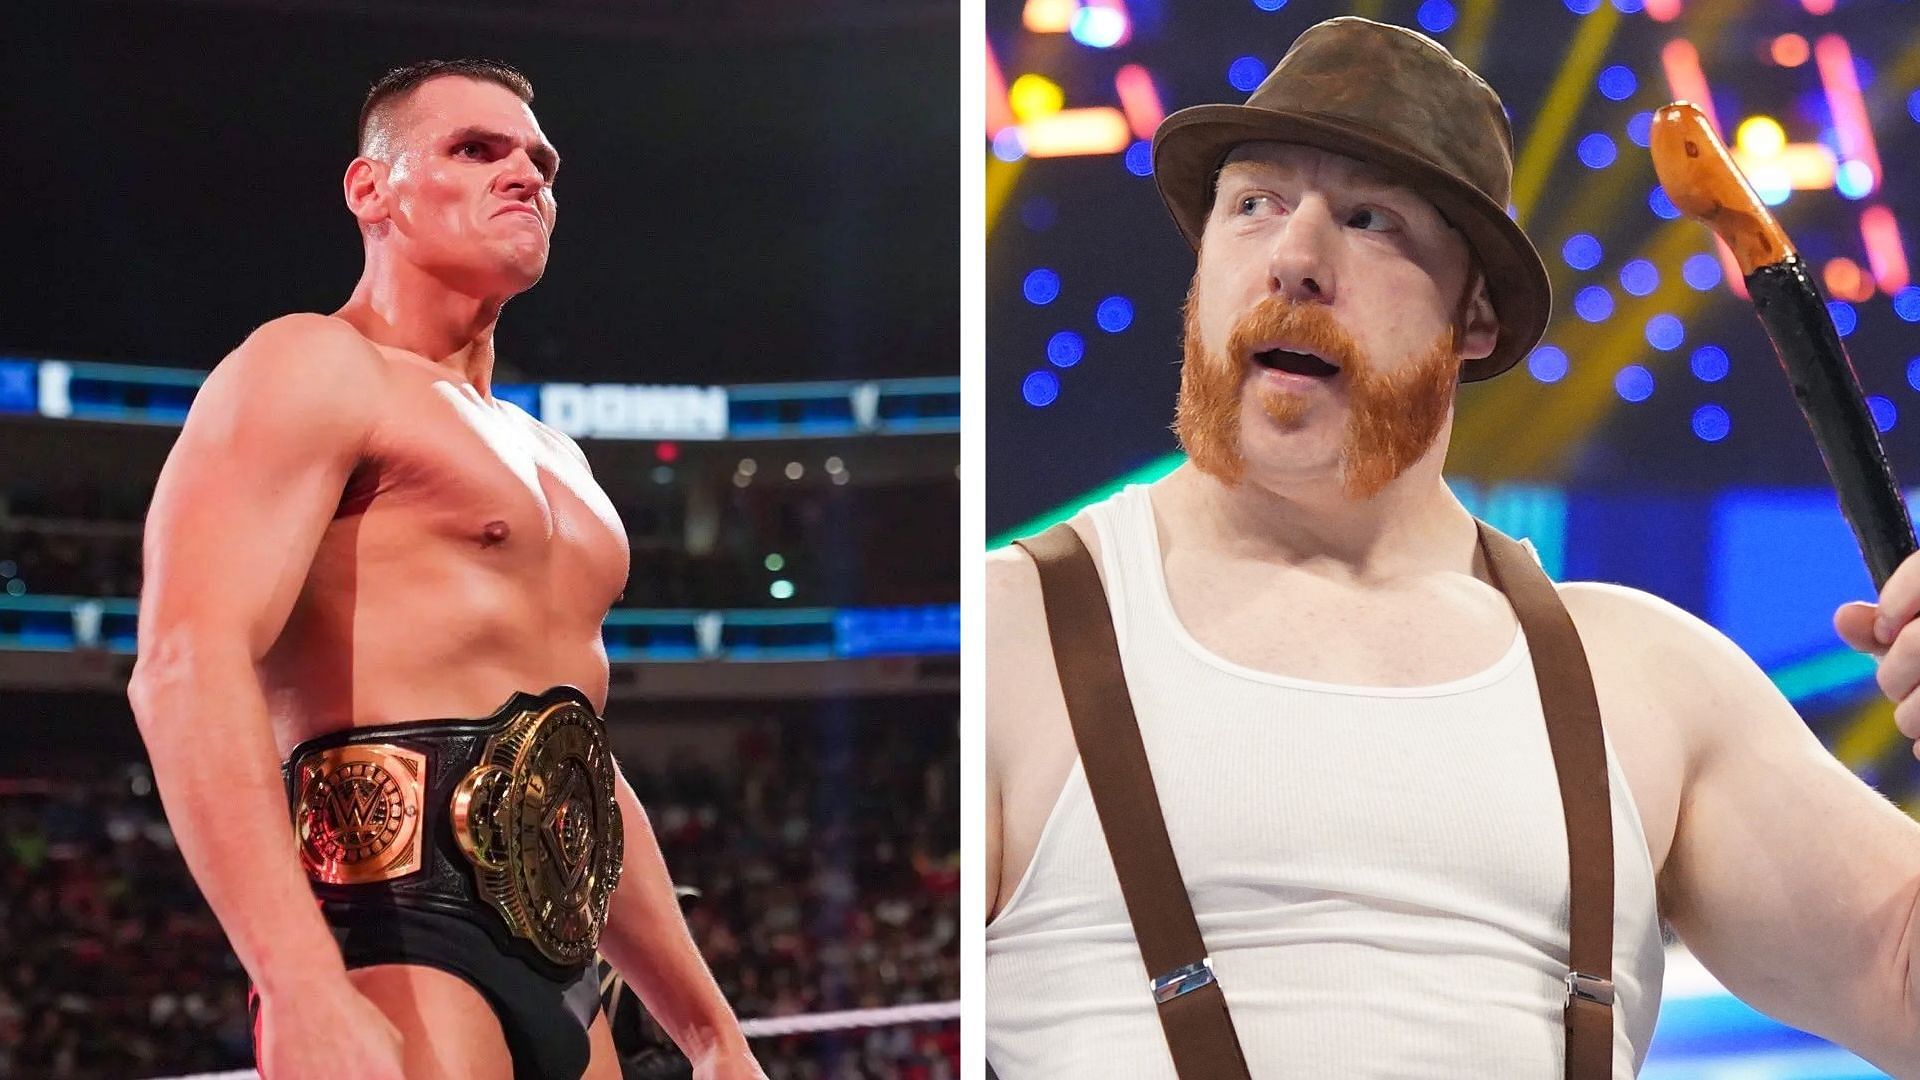 Gunther and Sheamus are set to clash on WWE SmackDown